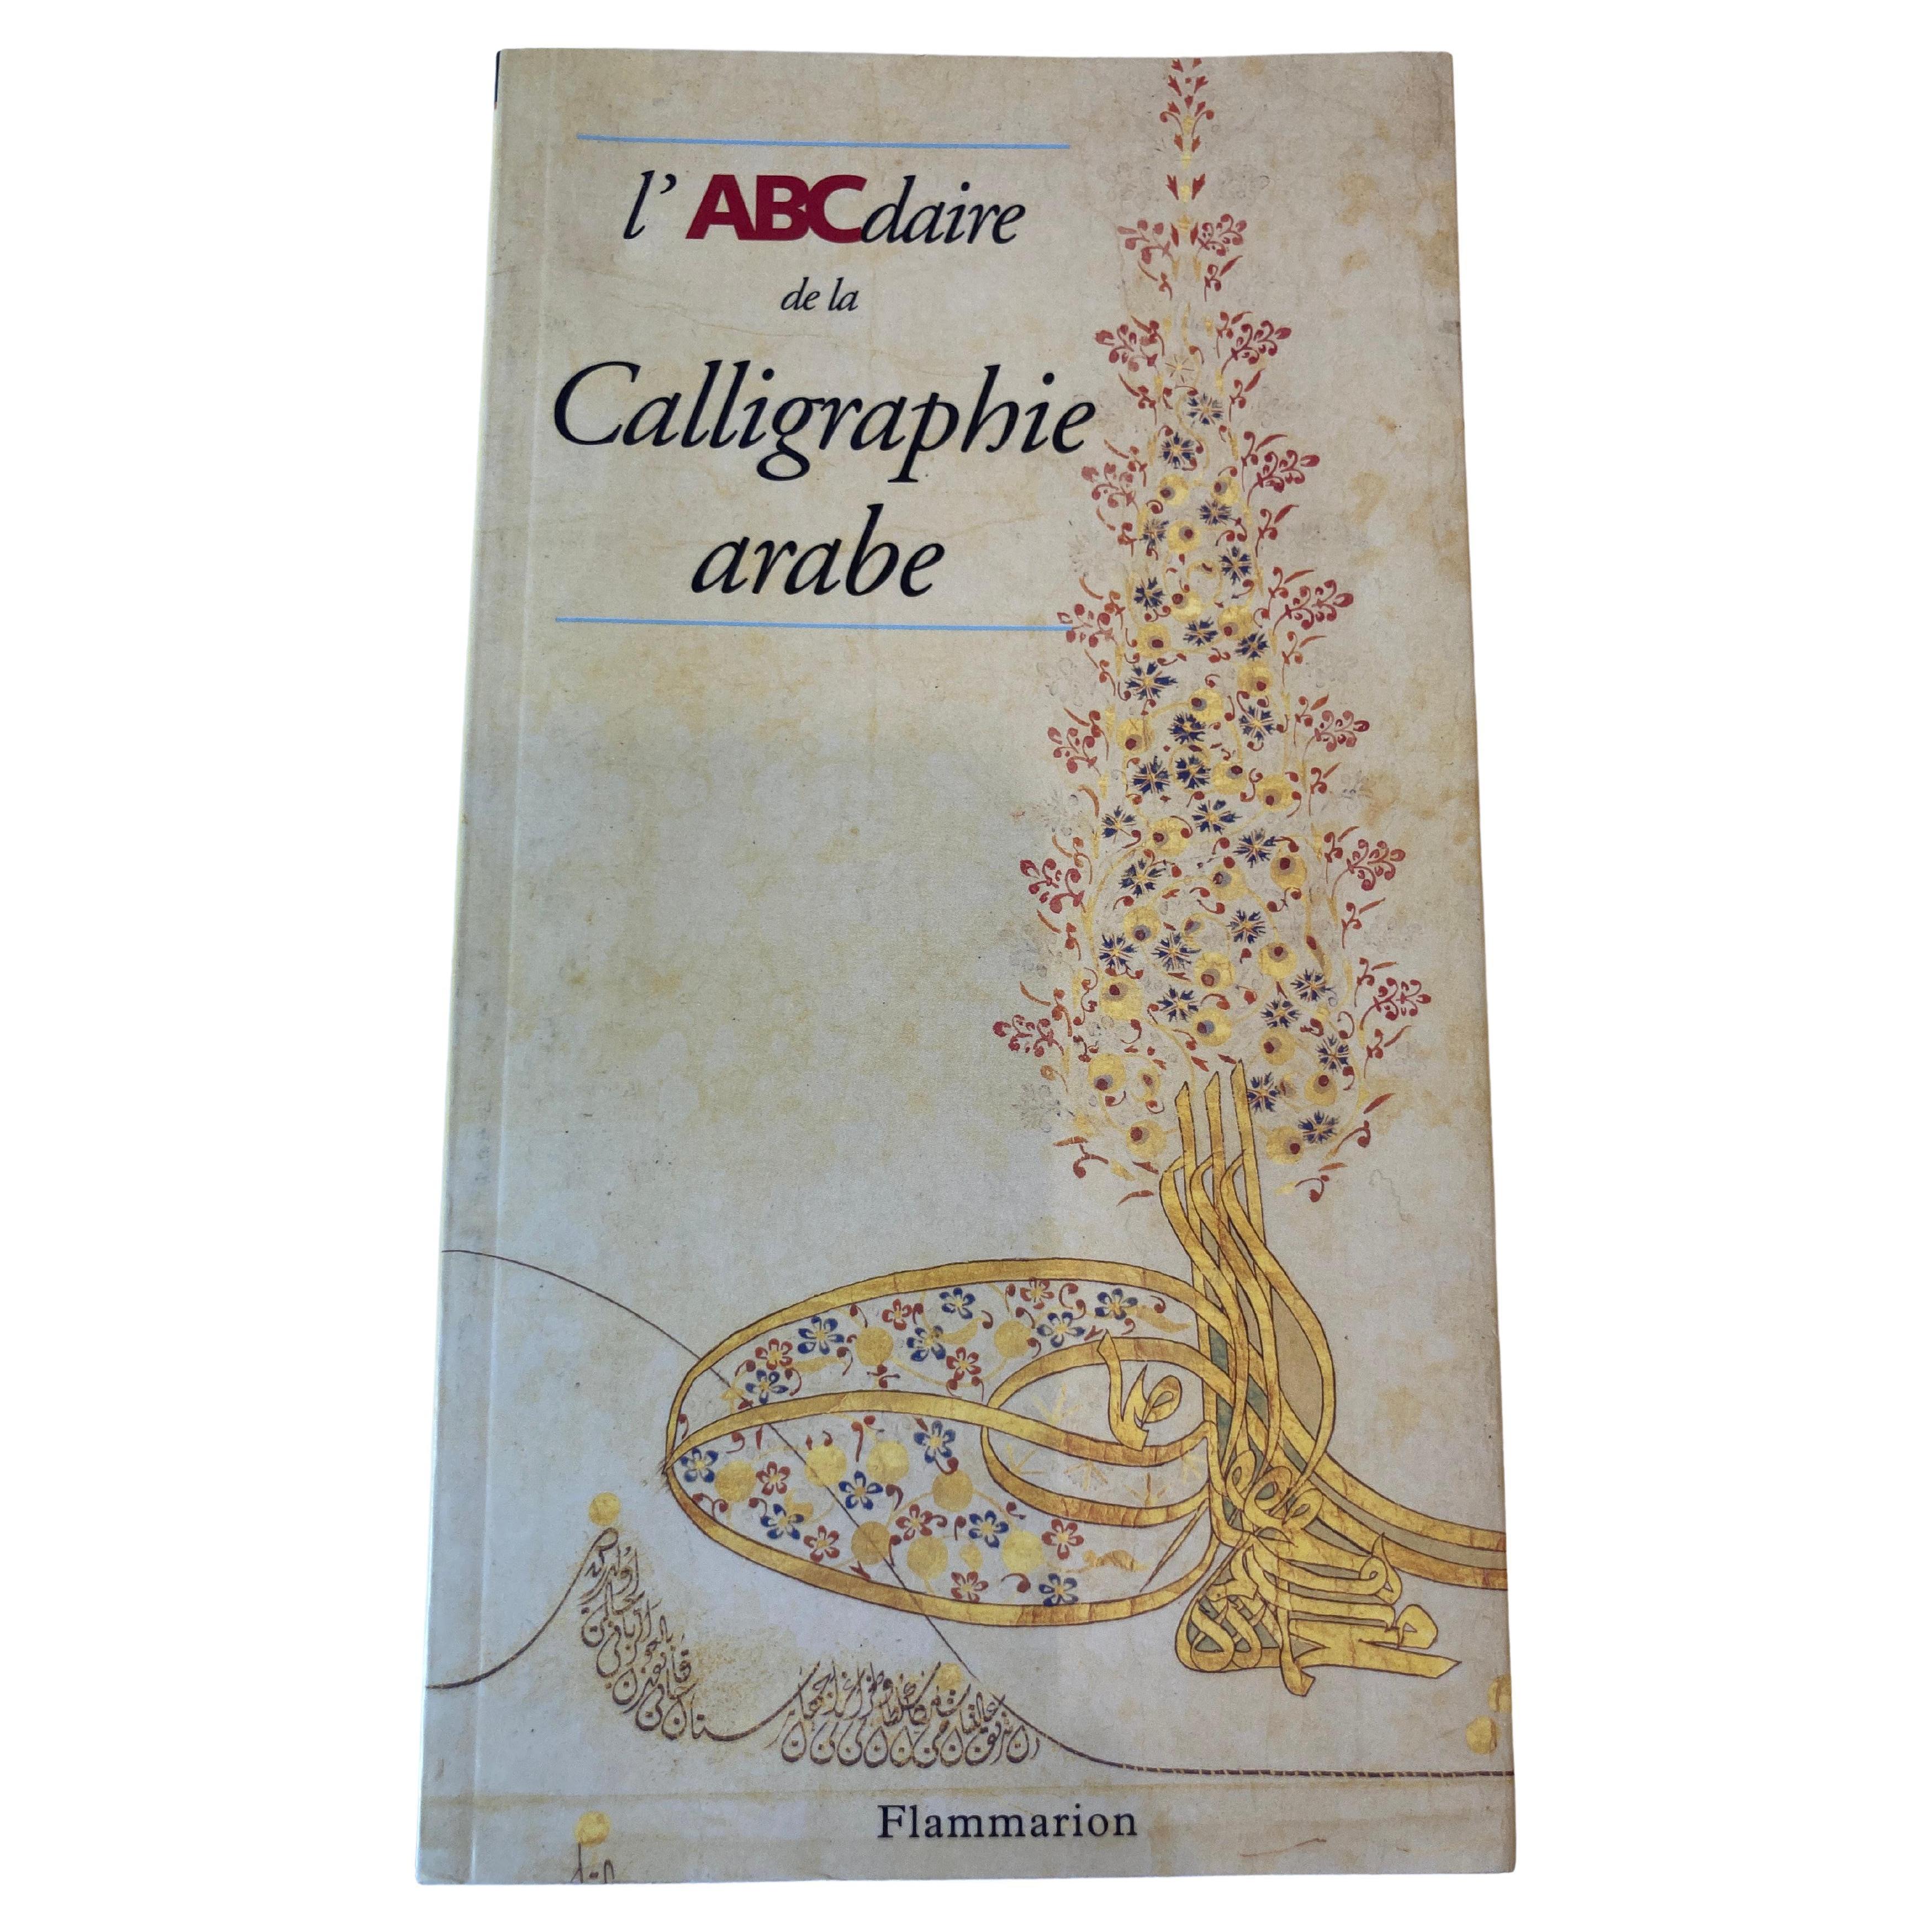 L'ABCdaire de la calligraphie arabe (ABCDAIRES) (French Edition) Paperback Book For Sale